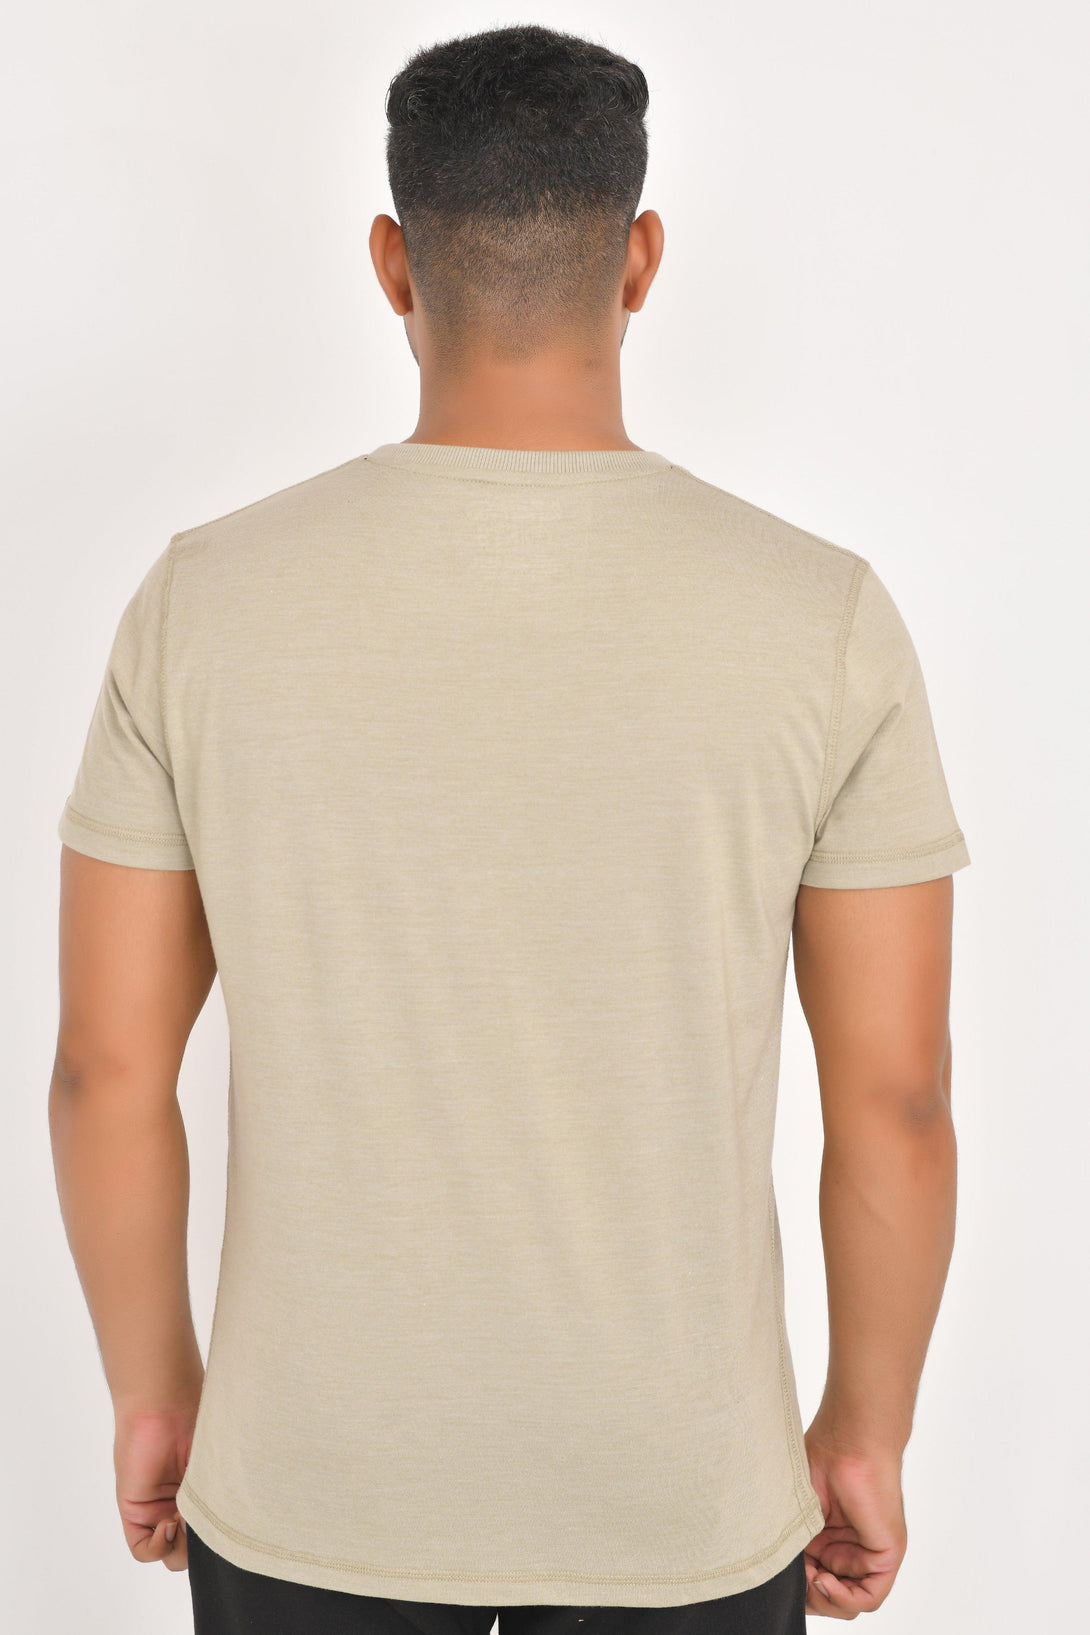 HENLEY T-Shirts | WINE-CHARCOAL-STONE - FTS